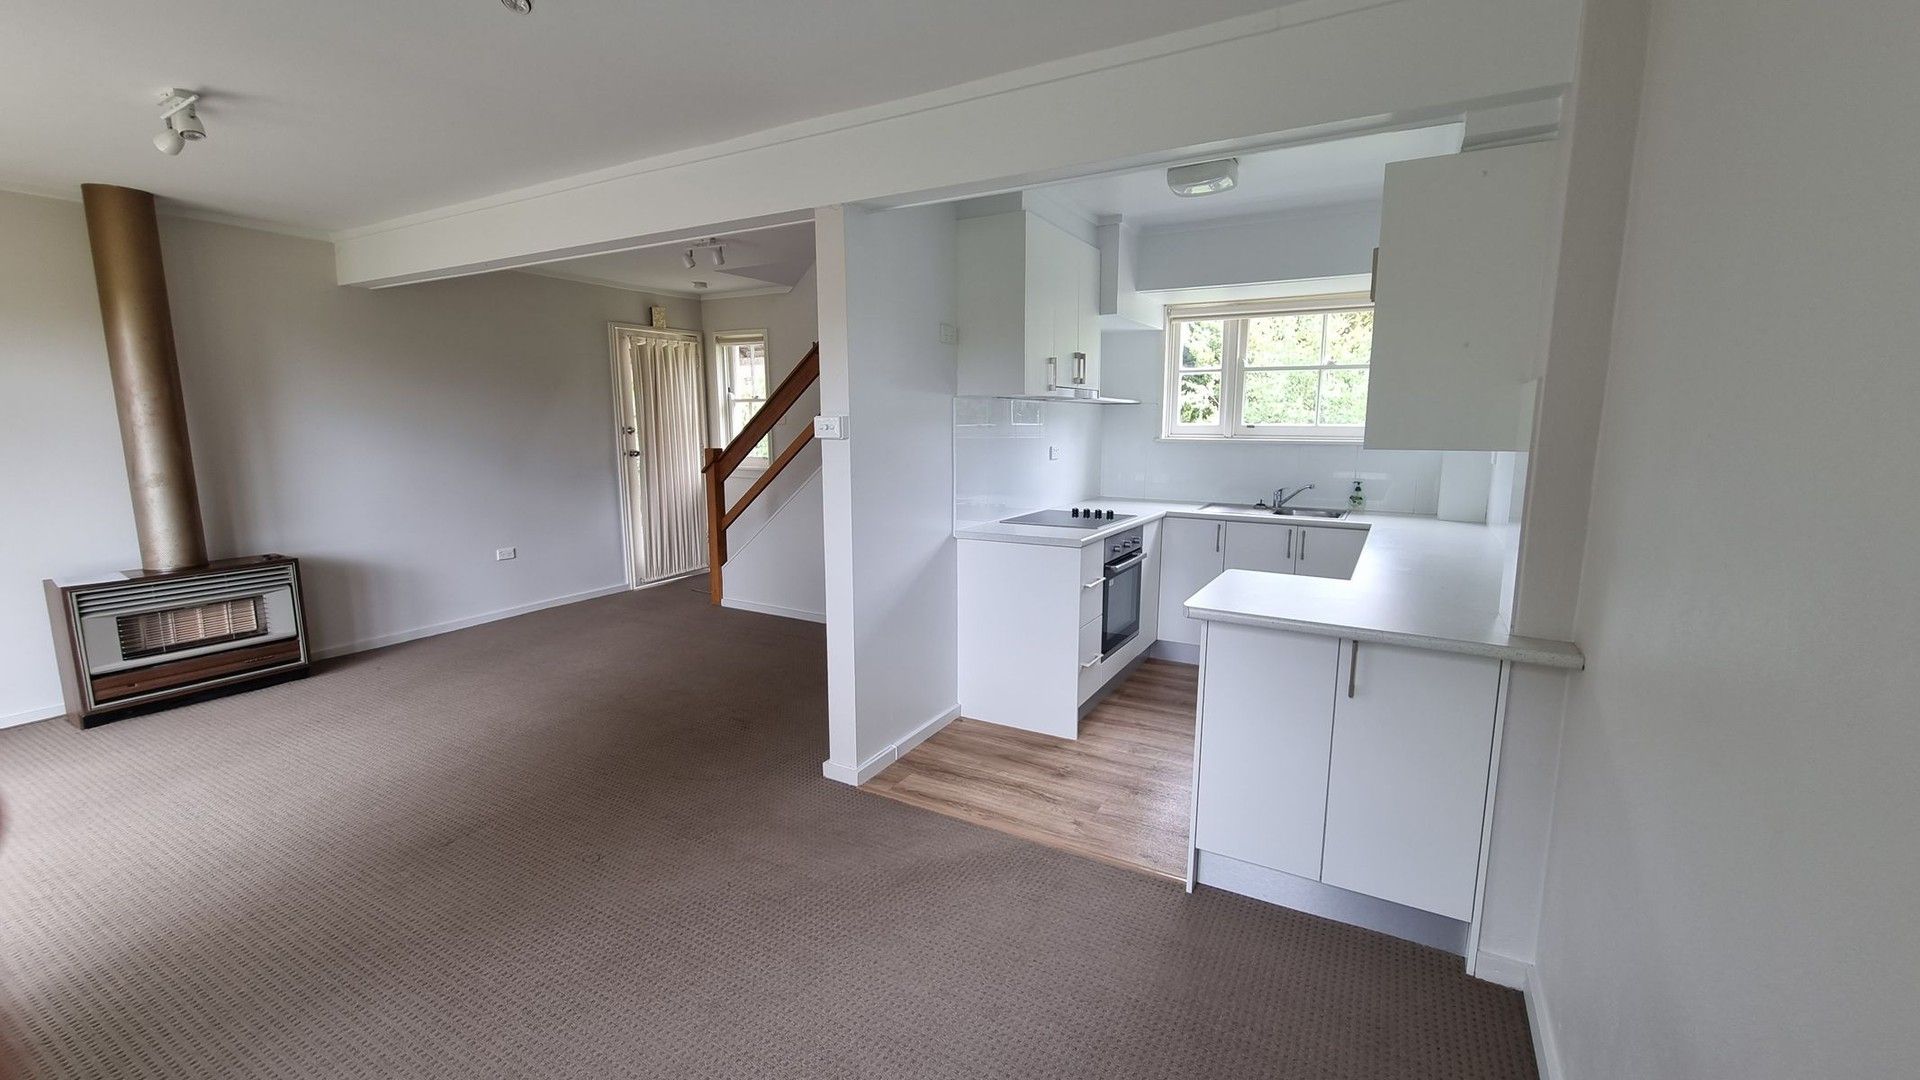 2 bedrooms Apartment / Unit / Flat in 1/21 Catherine Street ARMIDALE NSW, 2350